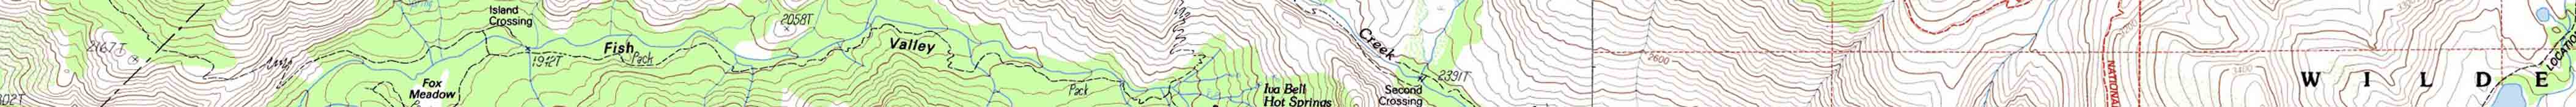 Fish Valley and Iva Bell Hot Springs alternative to JMT route to Vermiliong Valley.